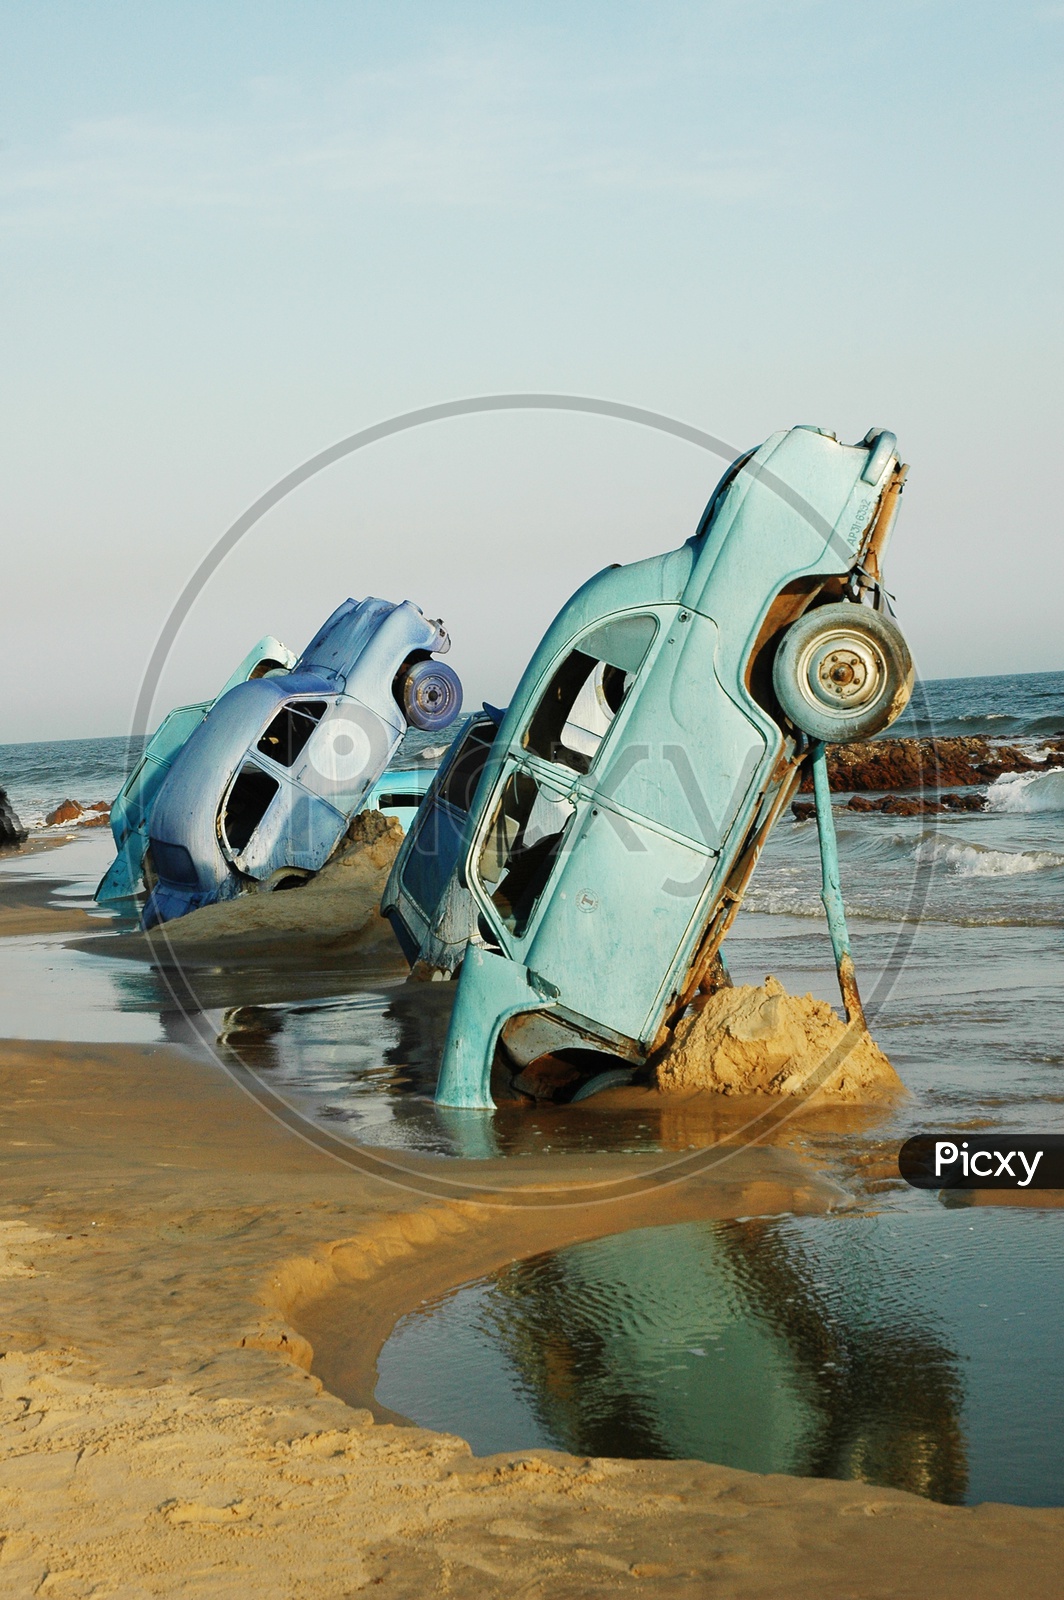 An old blue cars stuck in the sand at the beach